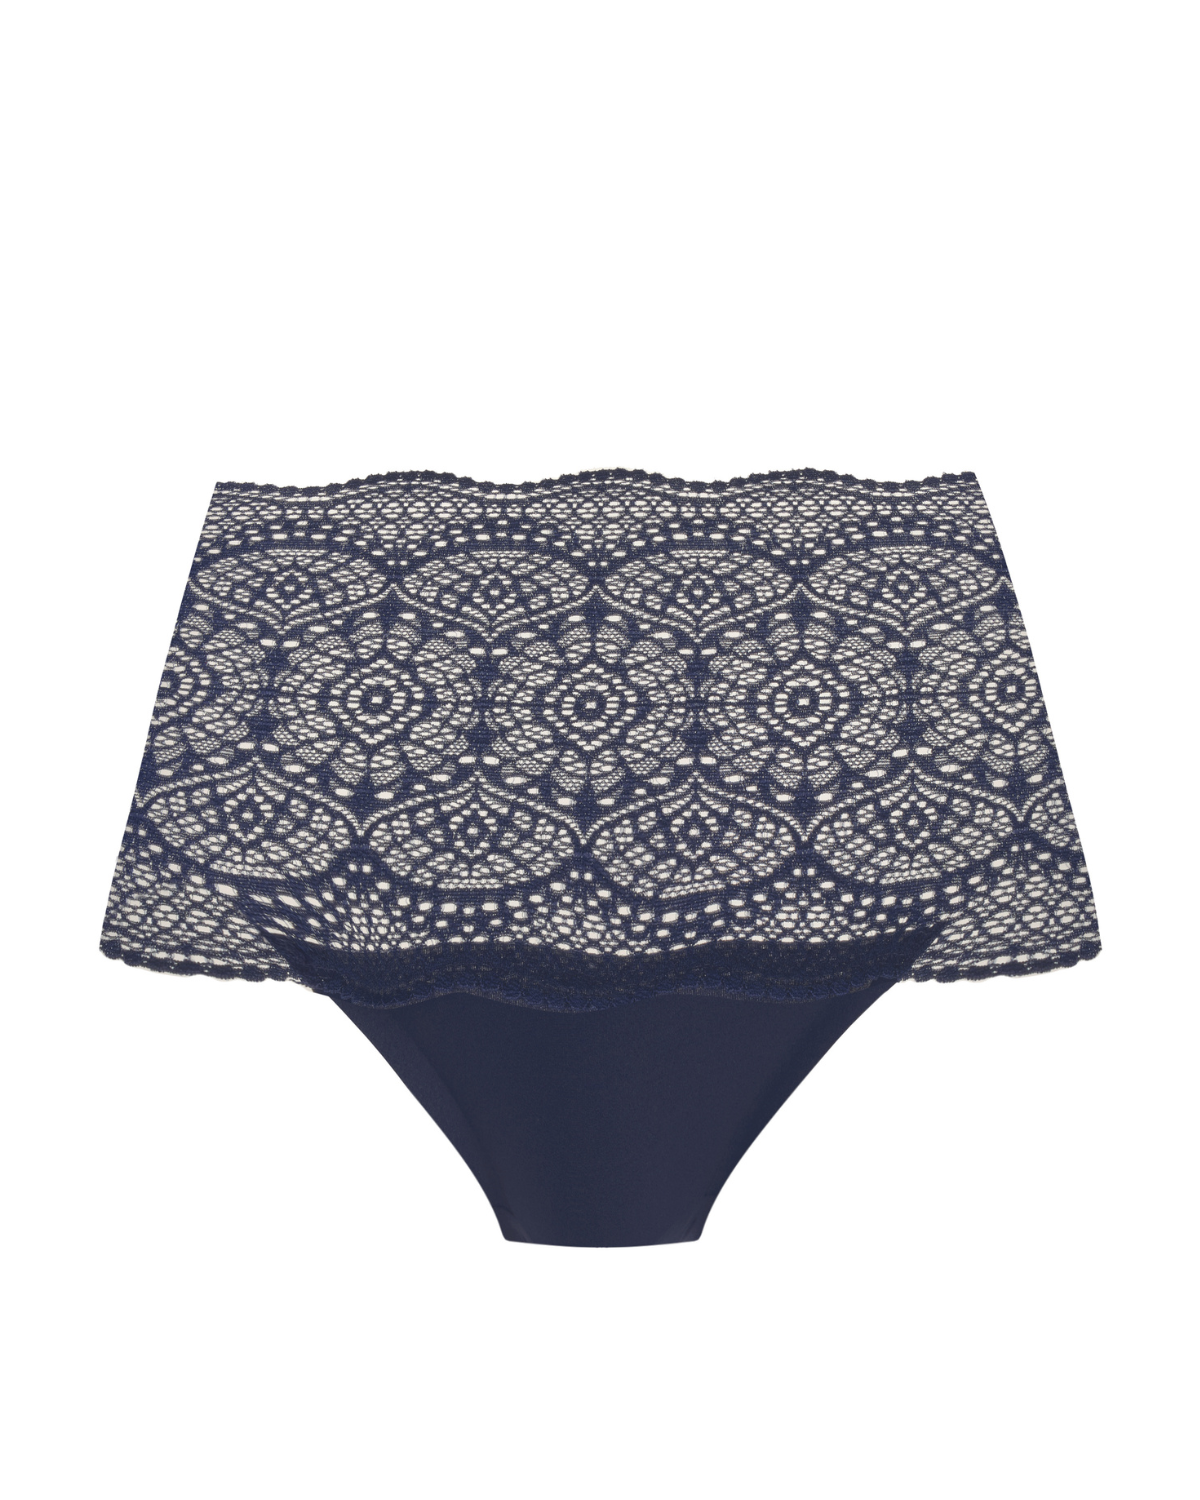 Flat lay of a wide lace band brief panty in navy